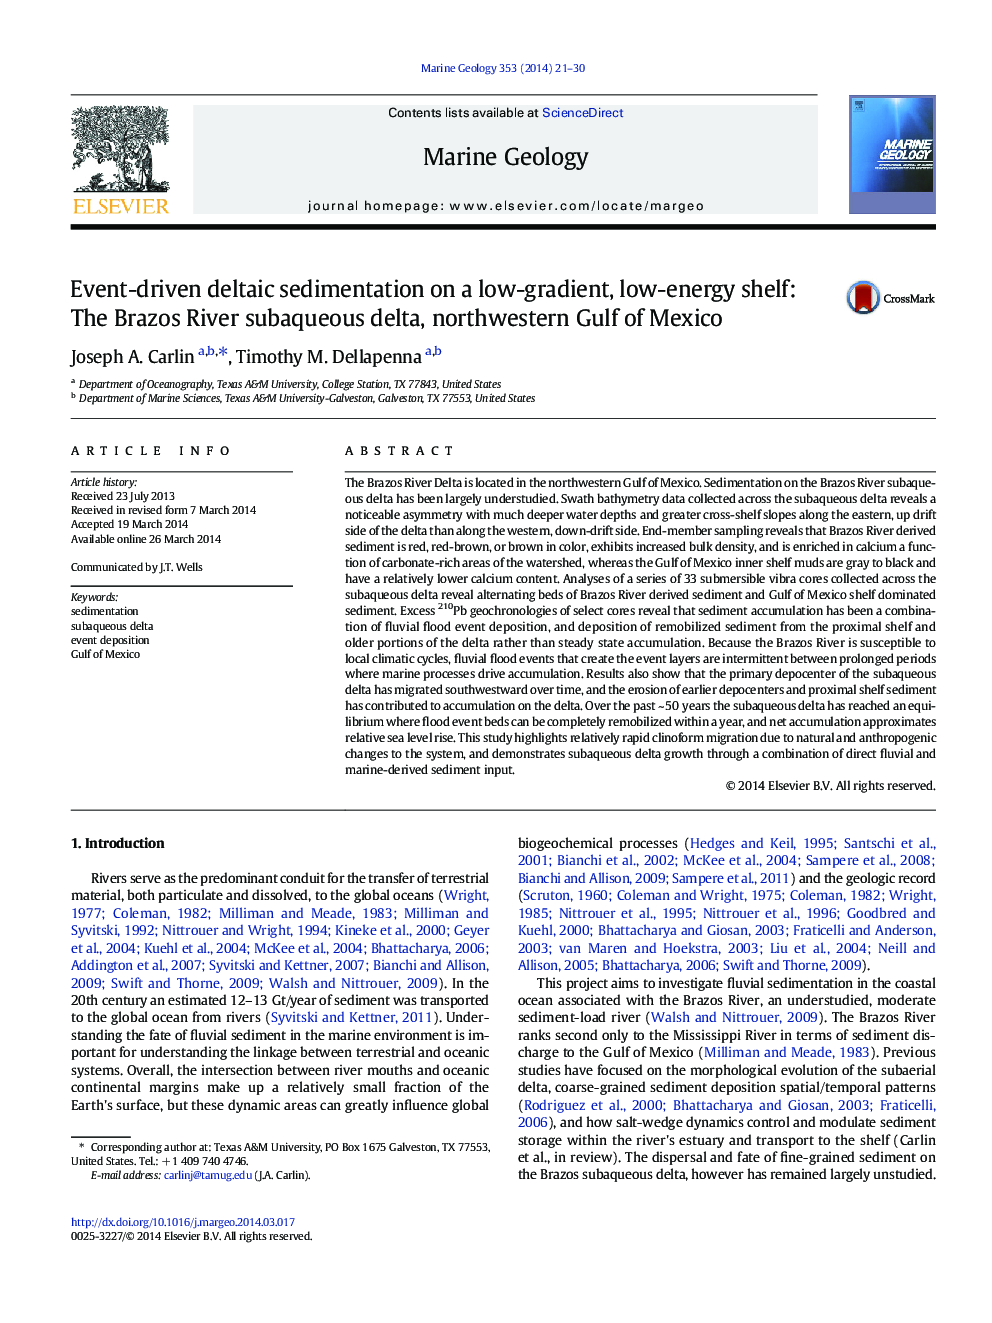 Event-driven deltaic sedimentation on a low-gradient, low-energy shelf: The Brazos River subaqueous delta, northwestern Gulf of Mexico